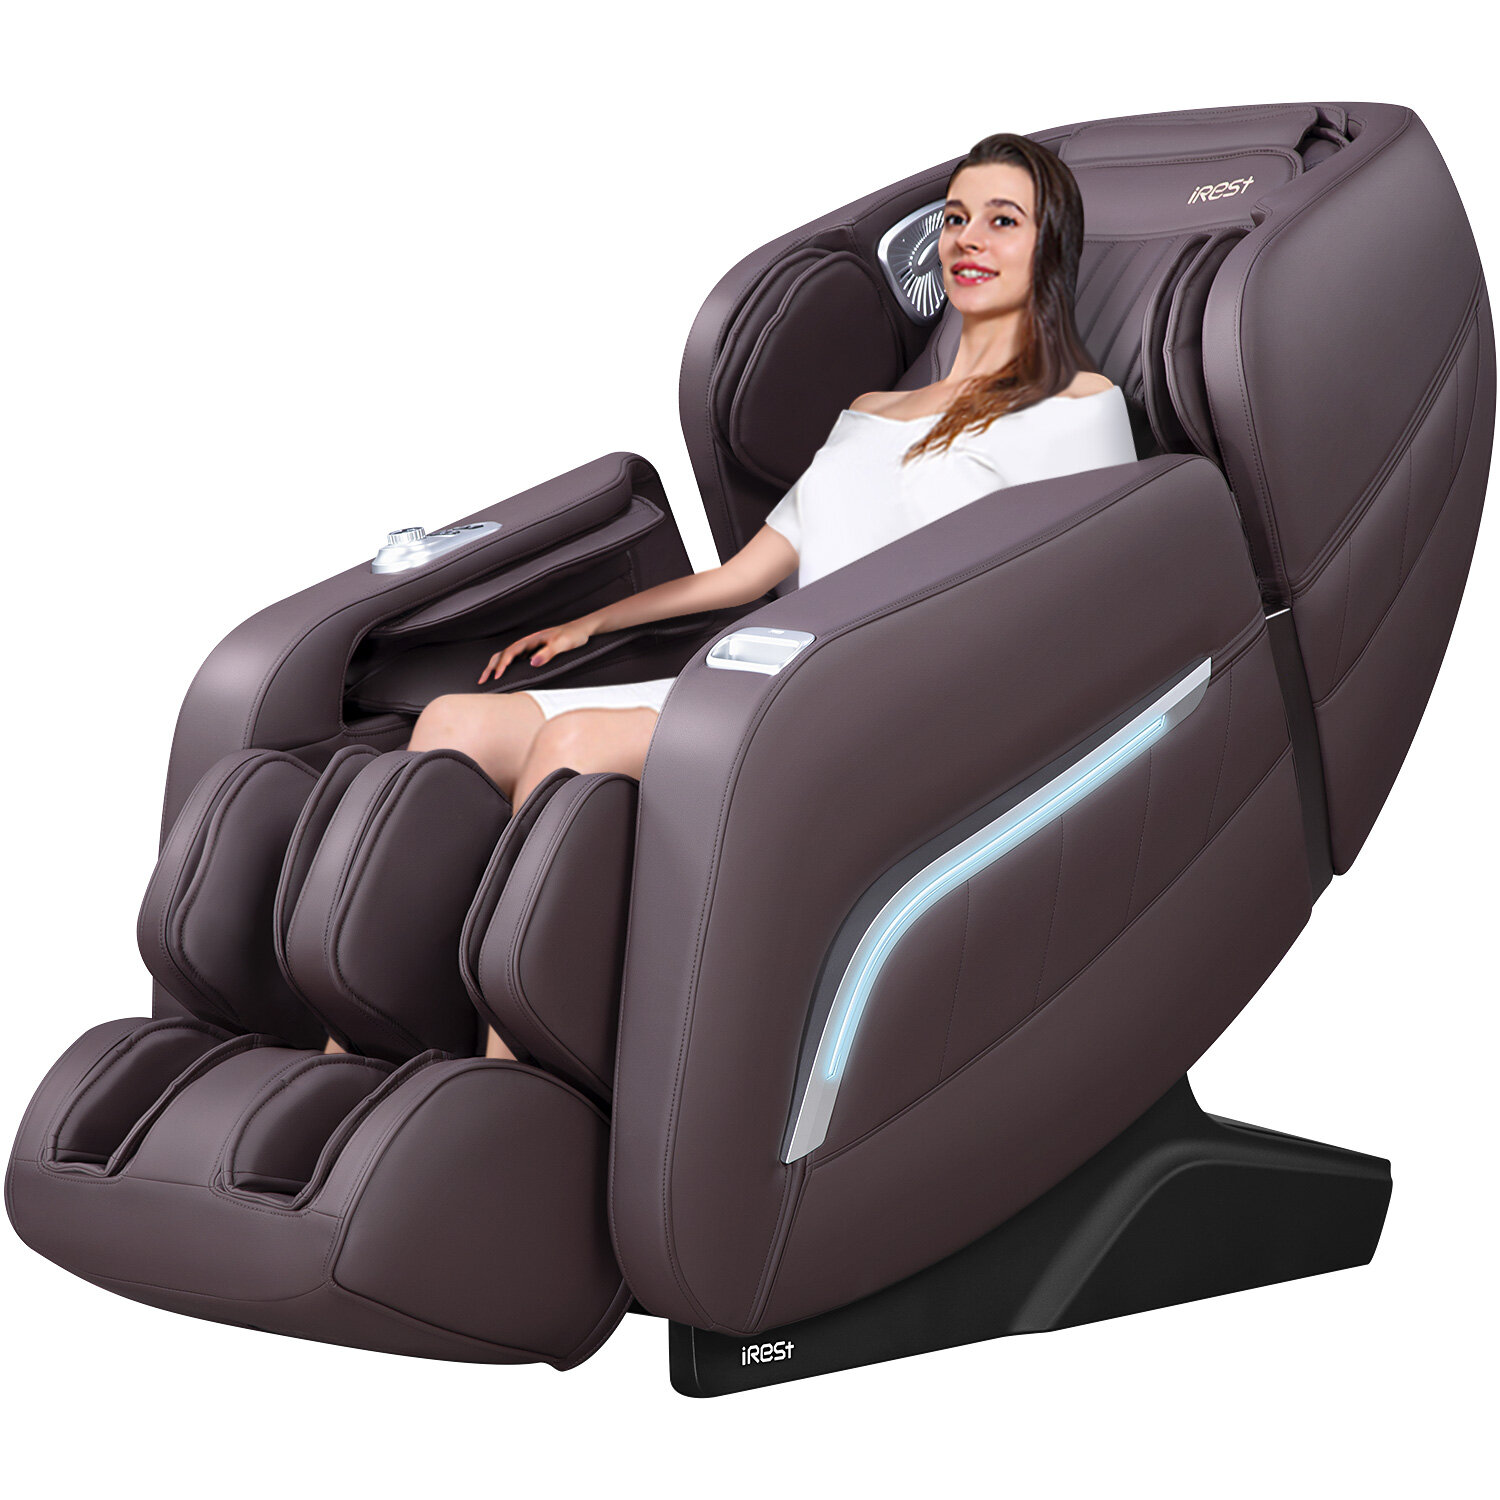 The Best Massage Chairs Reviewed 2021 Ultimate Buyers Guide